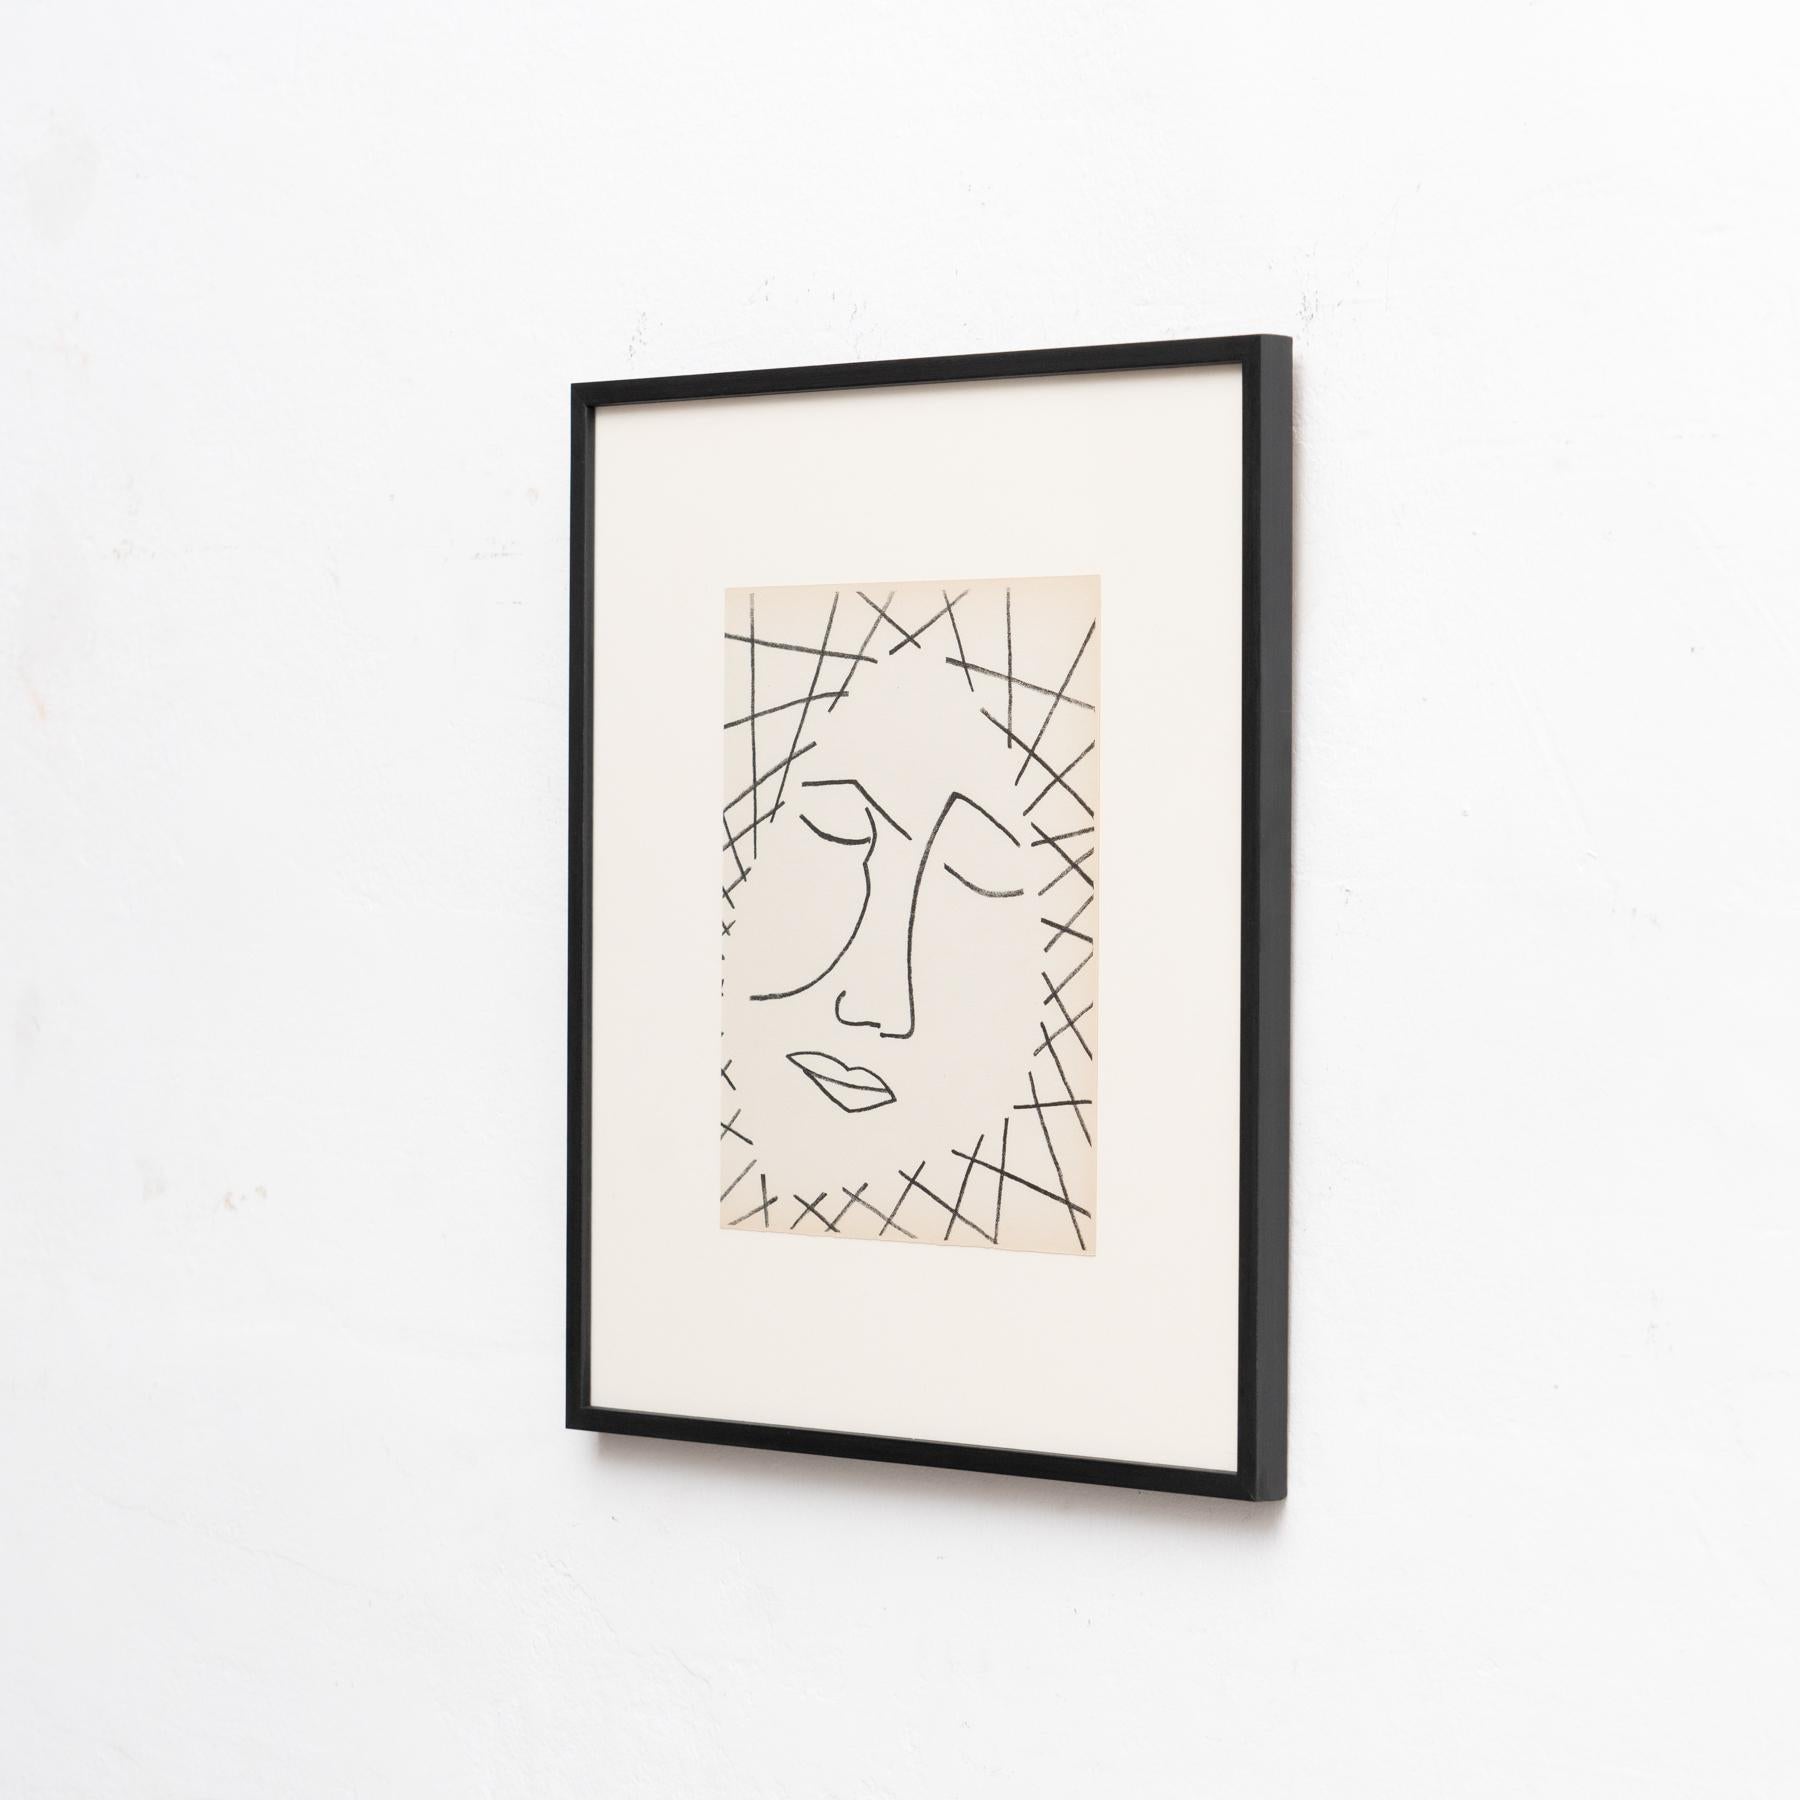 Françoise Gilot original lithograph 'Untilted Face'. 

From the poetry book 